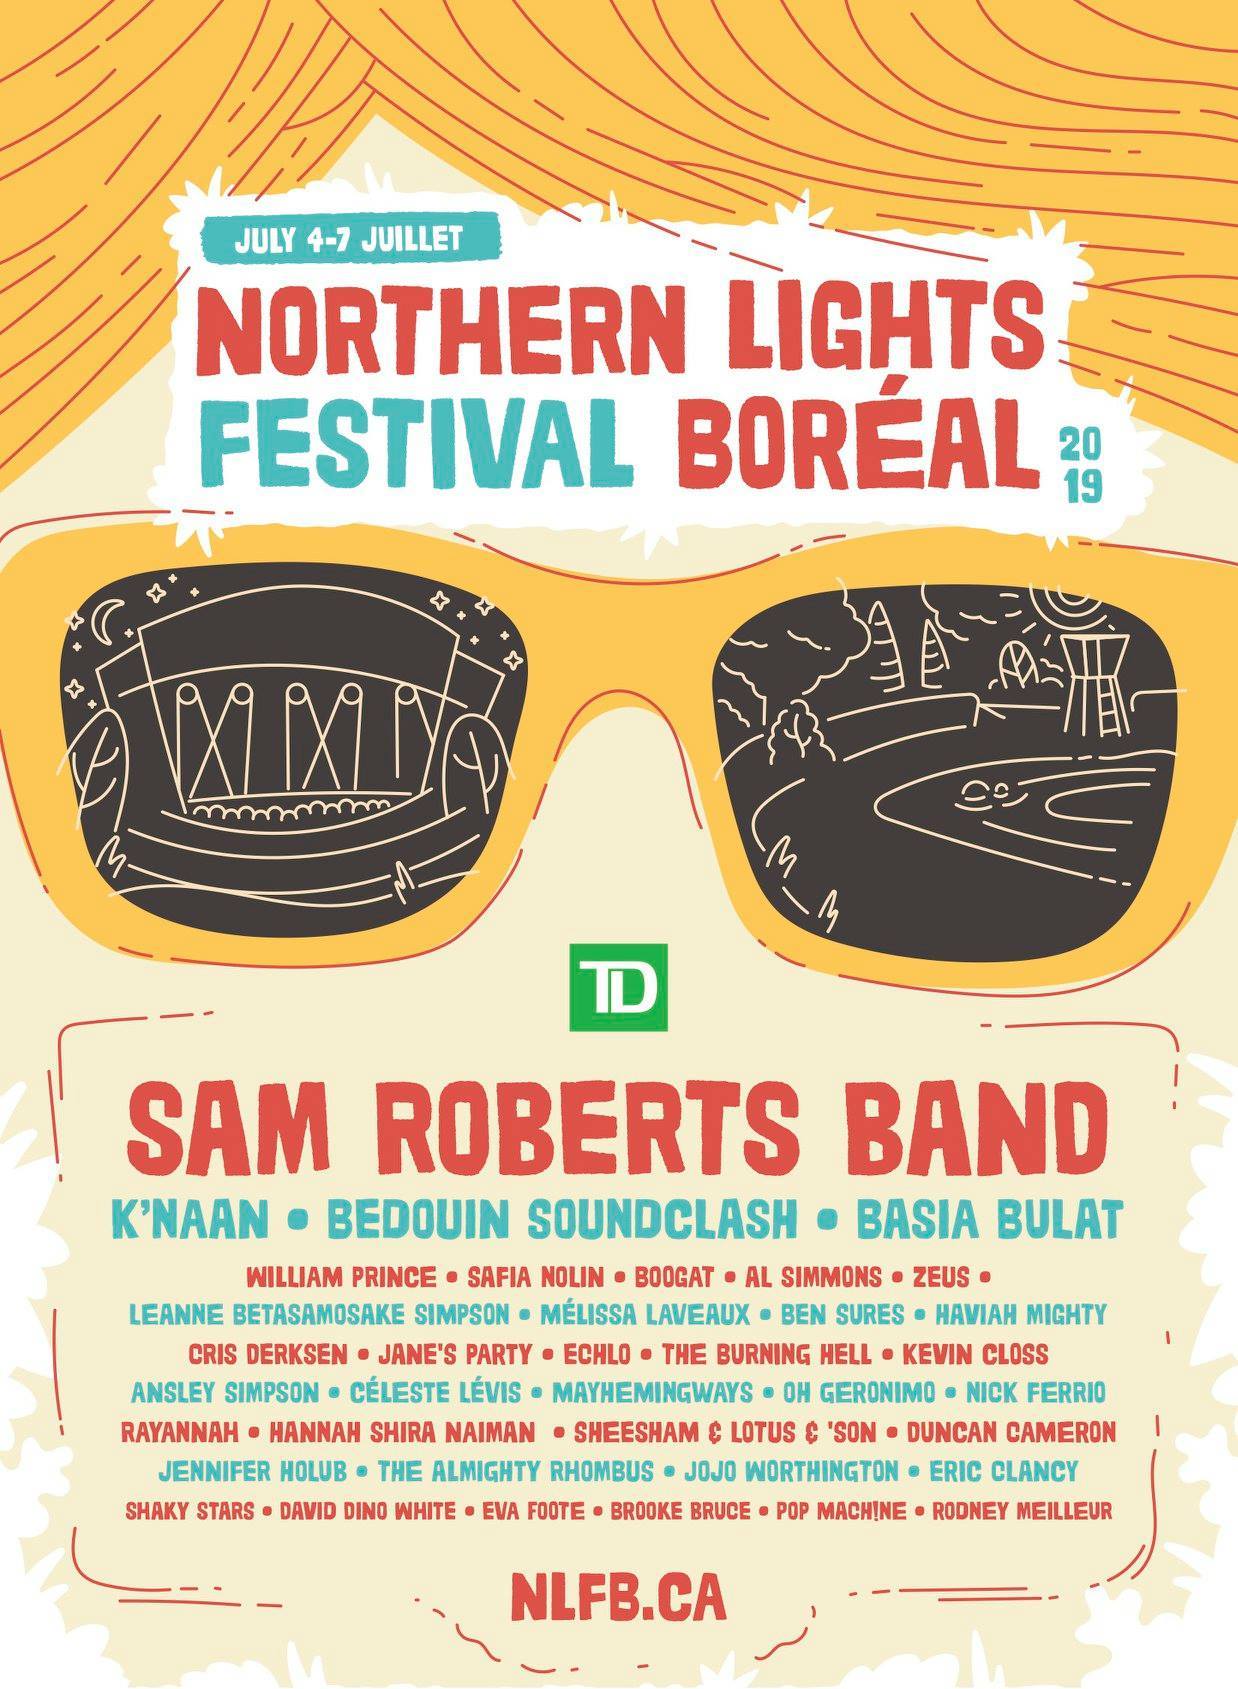 SONGCRAFT TAKES CENTRE STAGE AT NLFB 2019